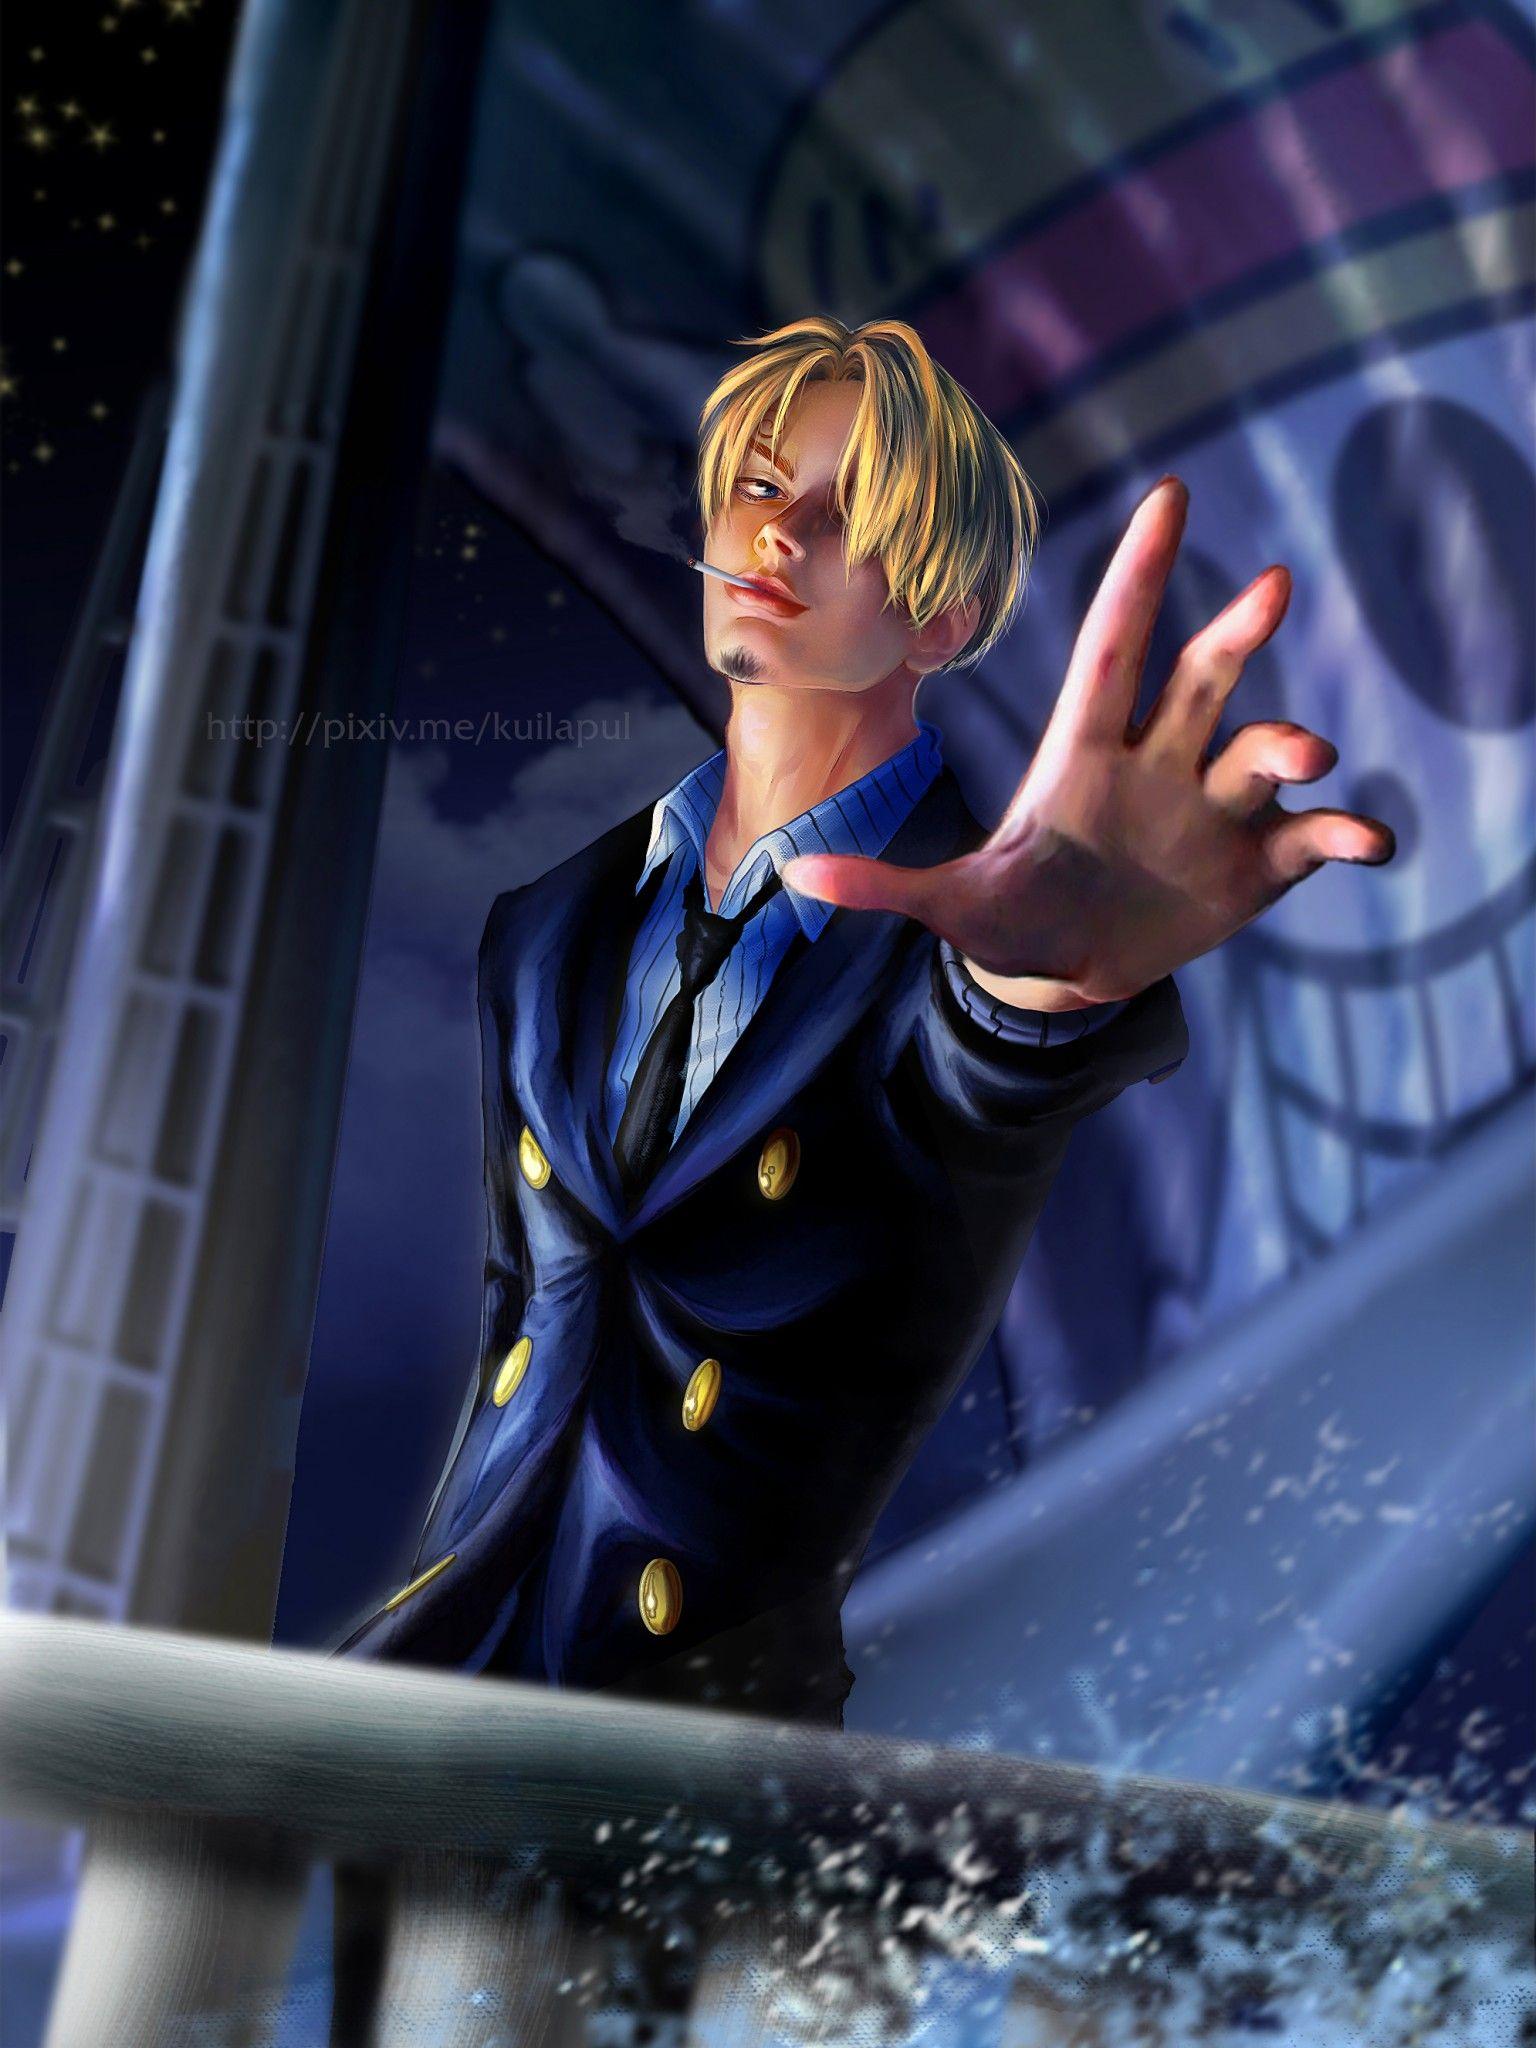 One Piece Sanji Wallpaper with HD resolution